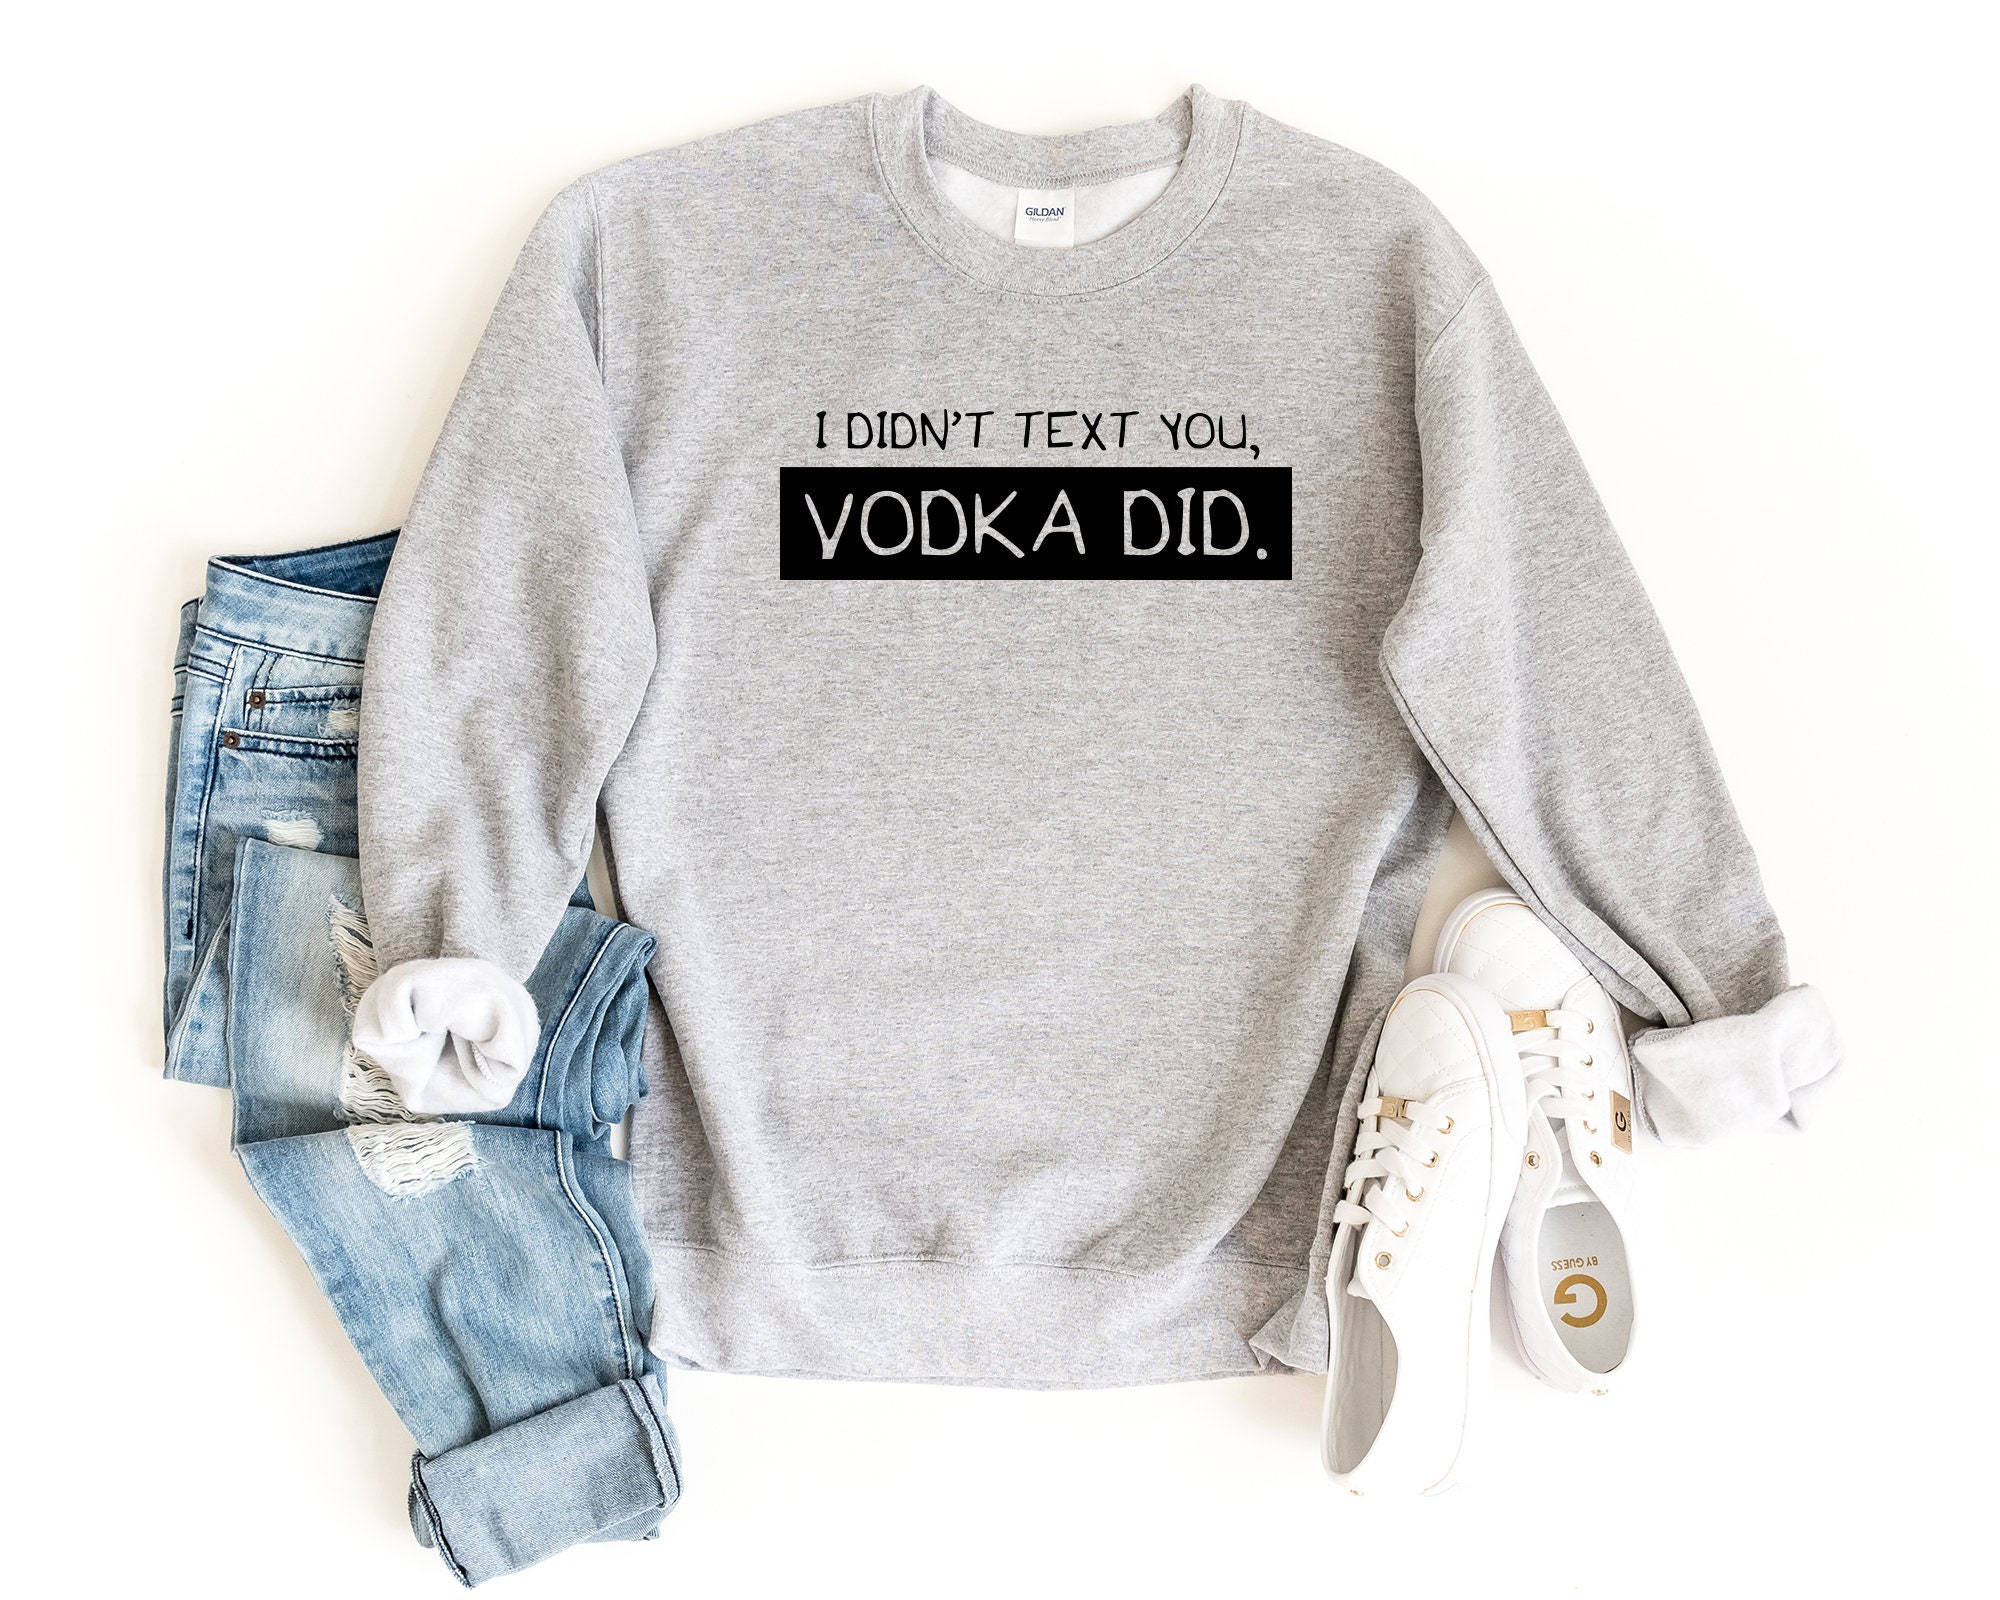 Love Vodka - Funny Louis Vuitton T-Shirt, Hoodie, Ugly Christmas